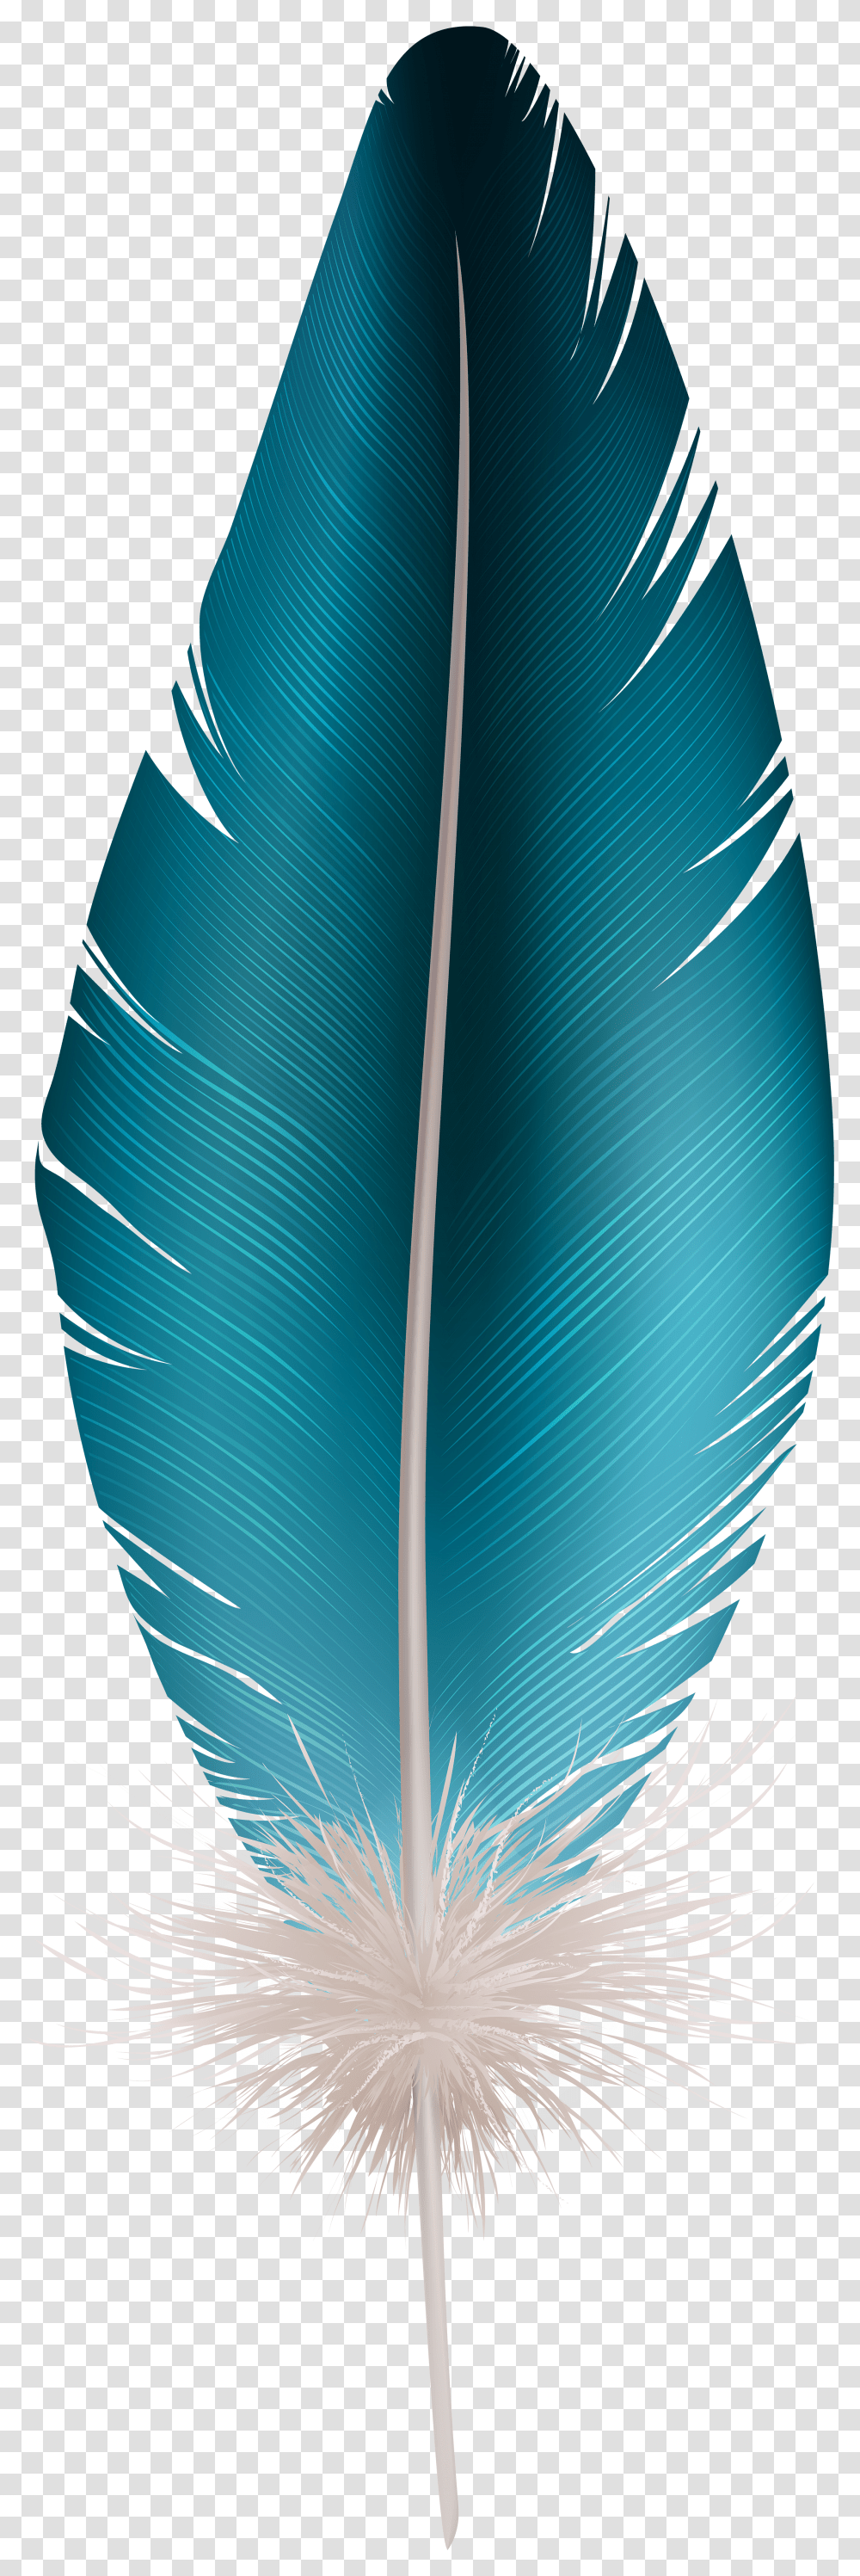 Feather Clip Art Blue Background Feather Clipart Transparent Png